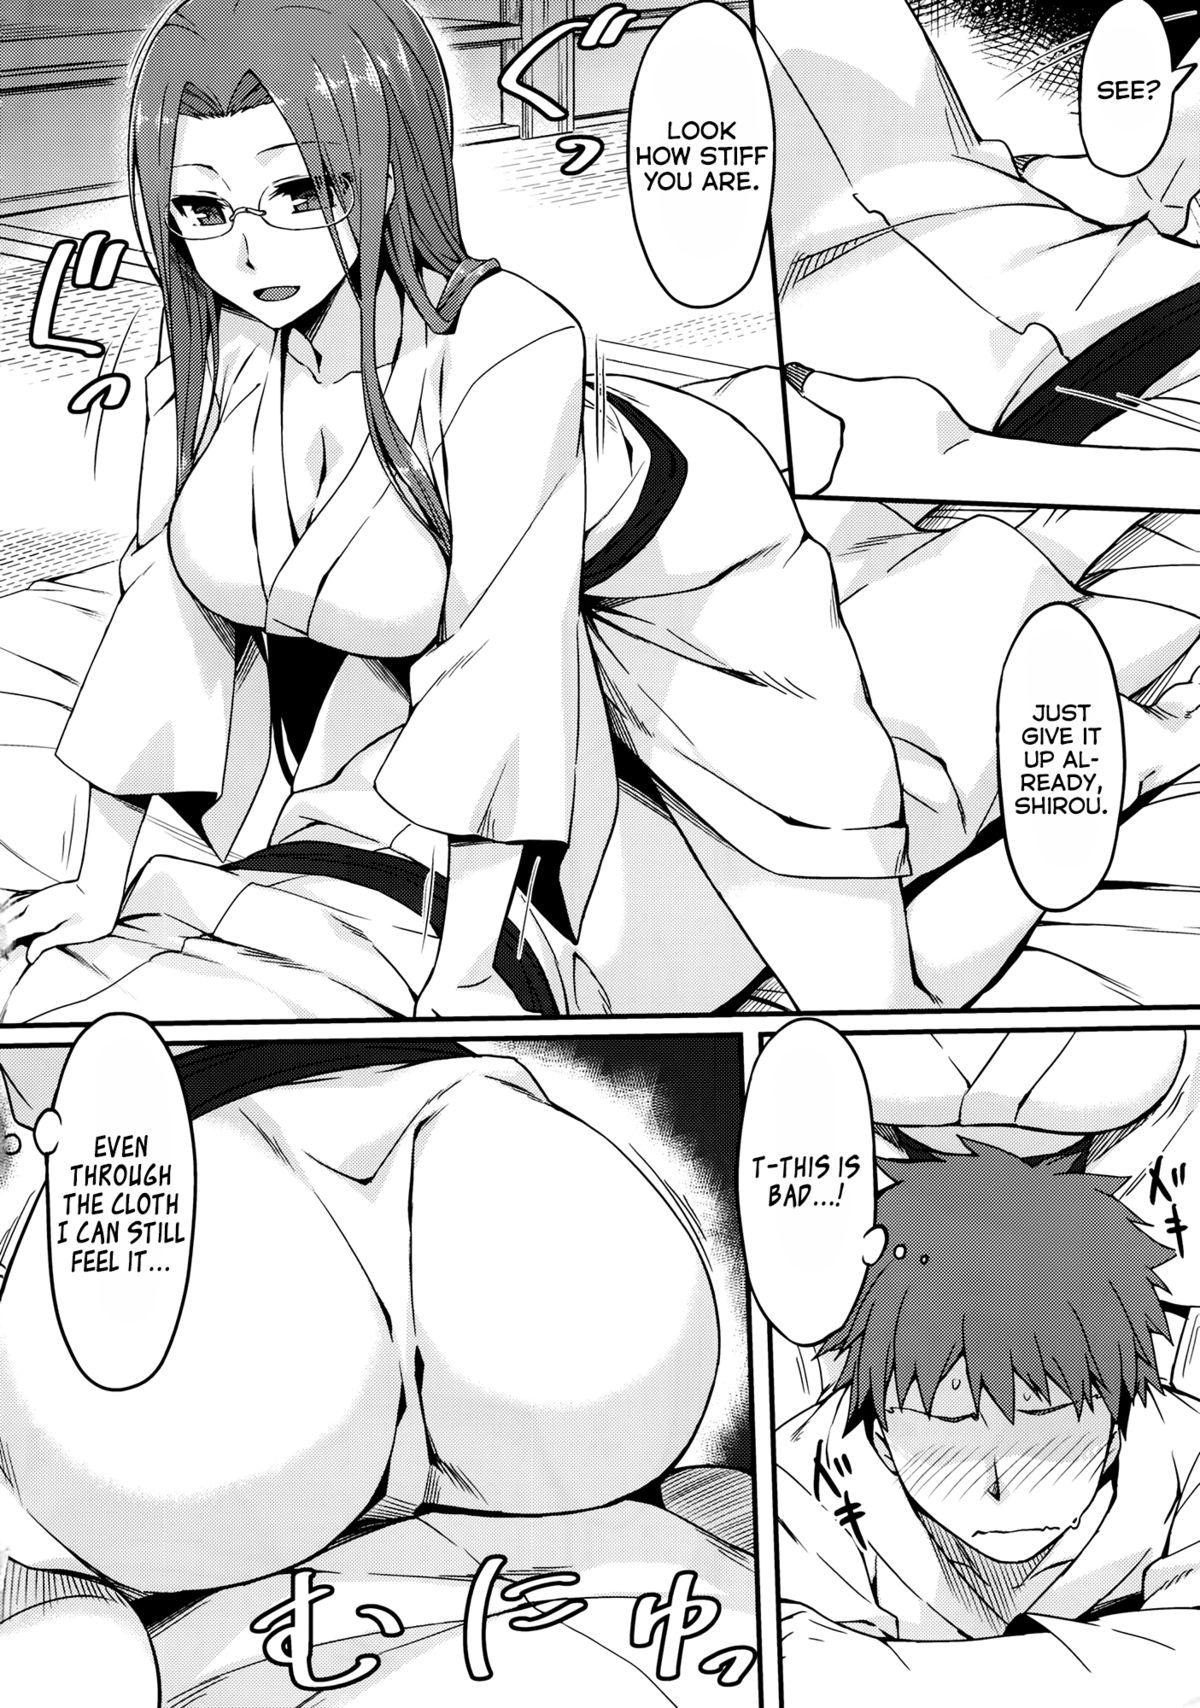 Reality (C88) [S.S.L (Yanagi)] Rider-san to Onsen Yado. Sonogo | Hot Spring Inn With Rider-san. After Story (Fate/stay night) [English] [Facedesk] - Fate stay night Girl On Girl - Page 4